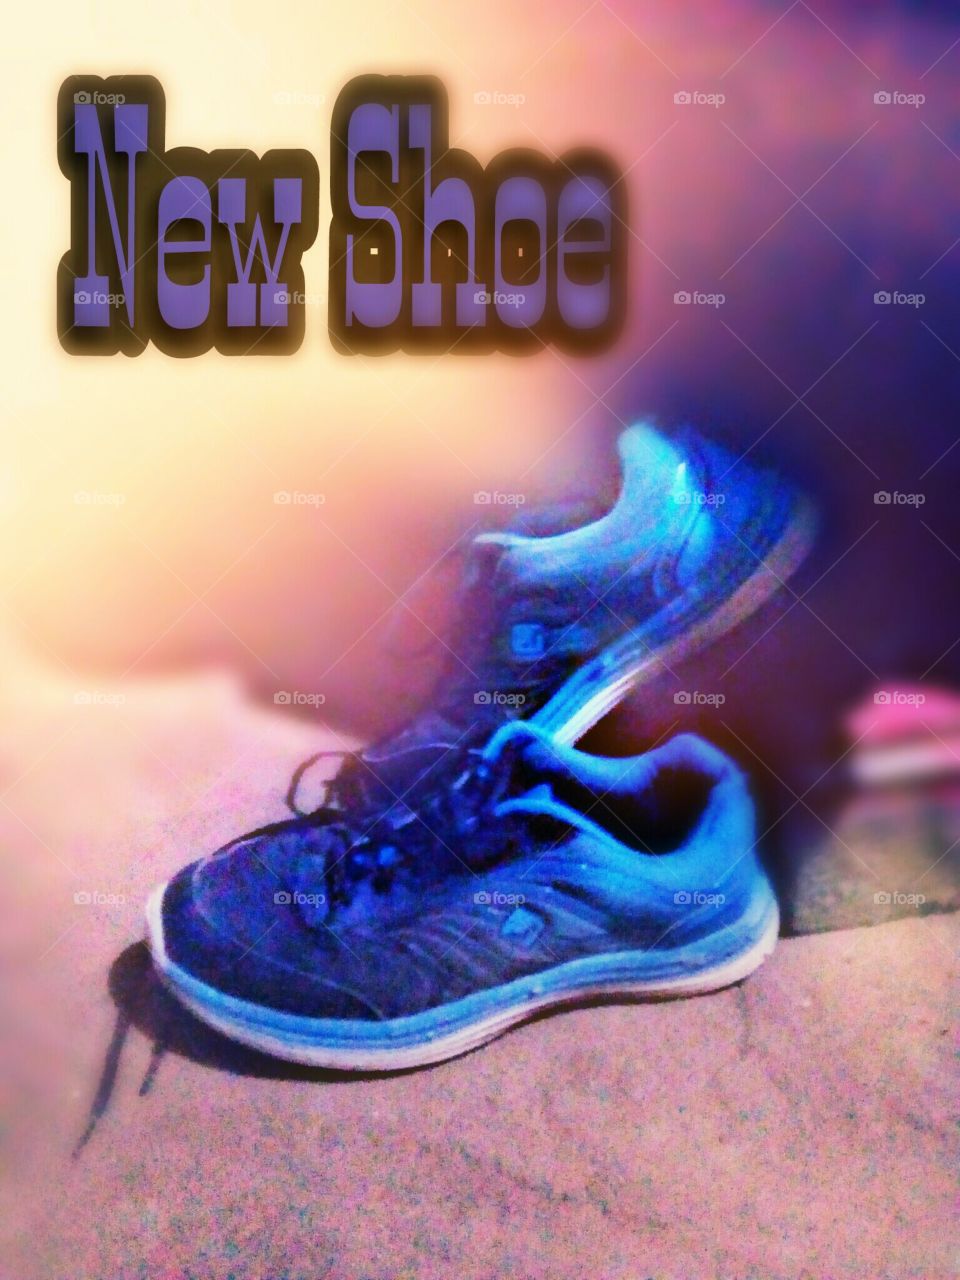 Nice shoe.
Everybody for comfortable nice and beautiful shoe which sport shoe .